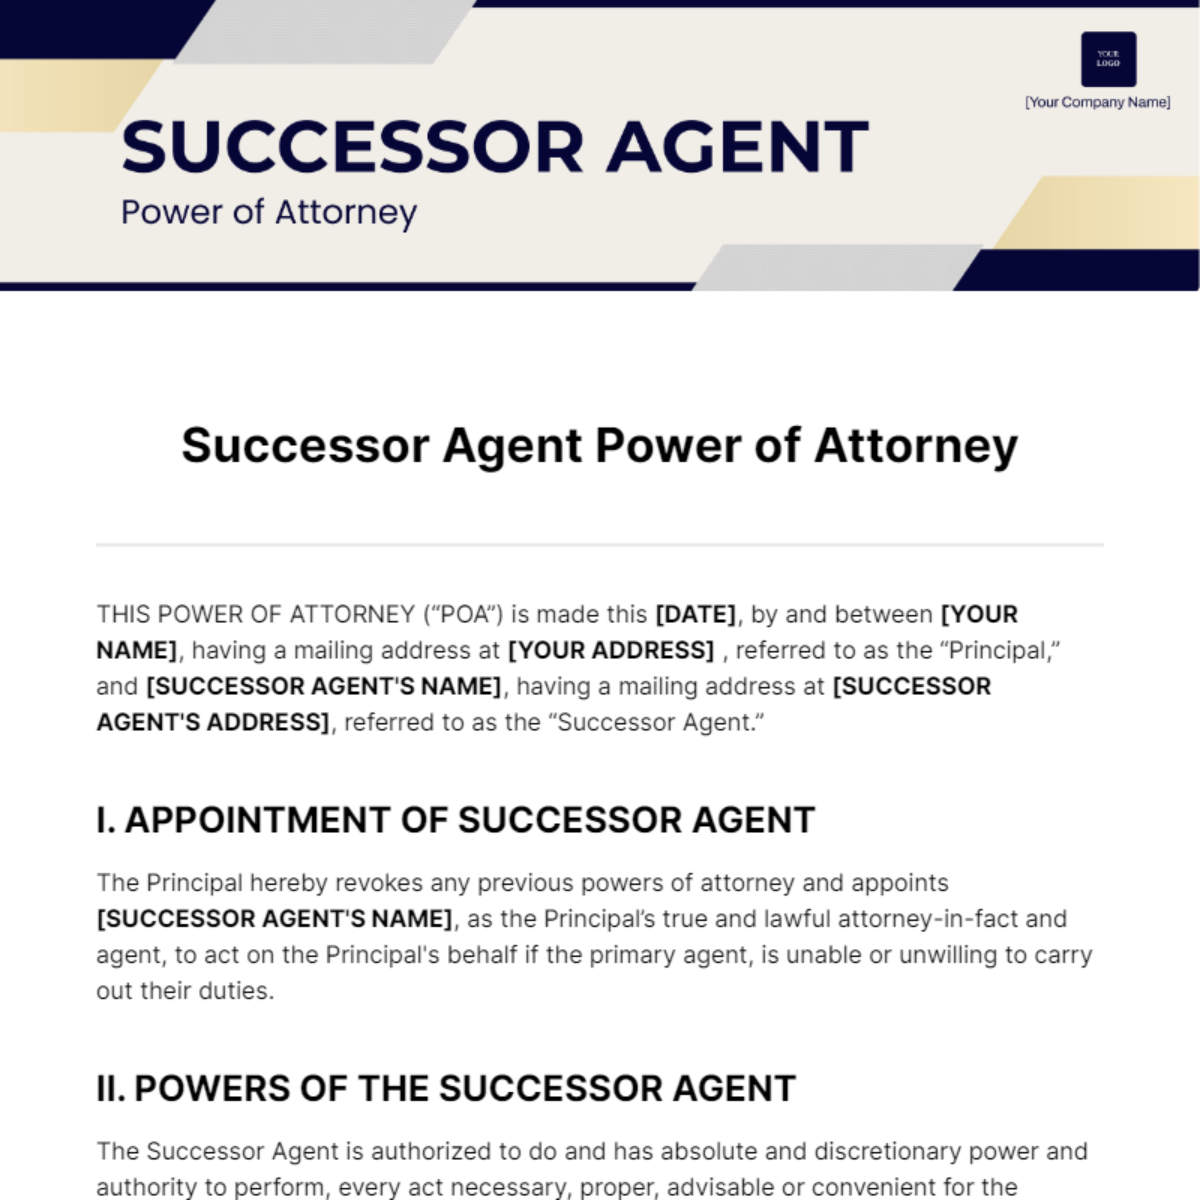 Free Successor Agent Power of Attorney Template